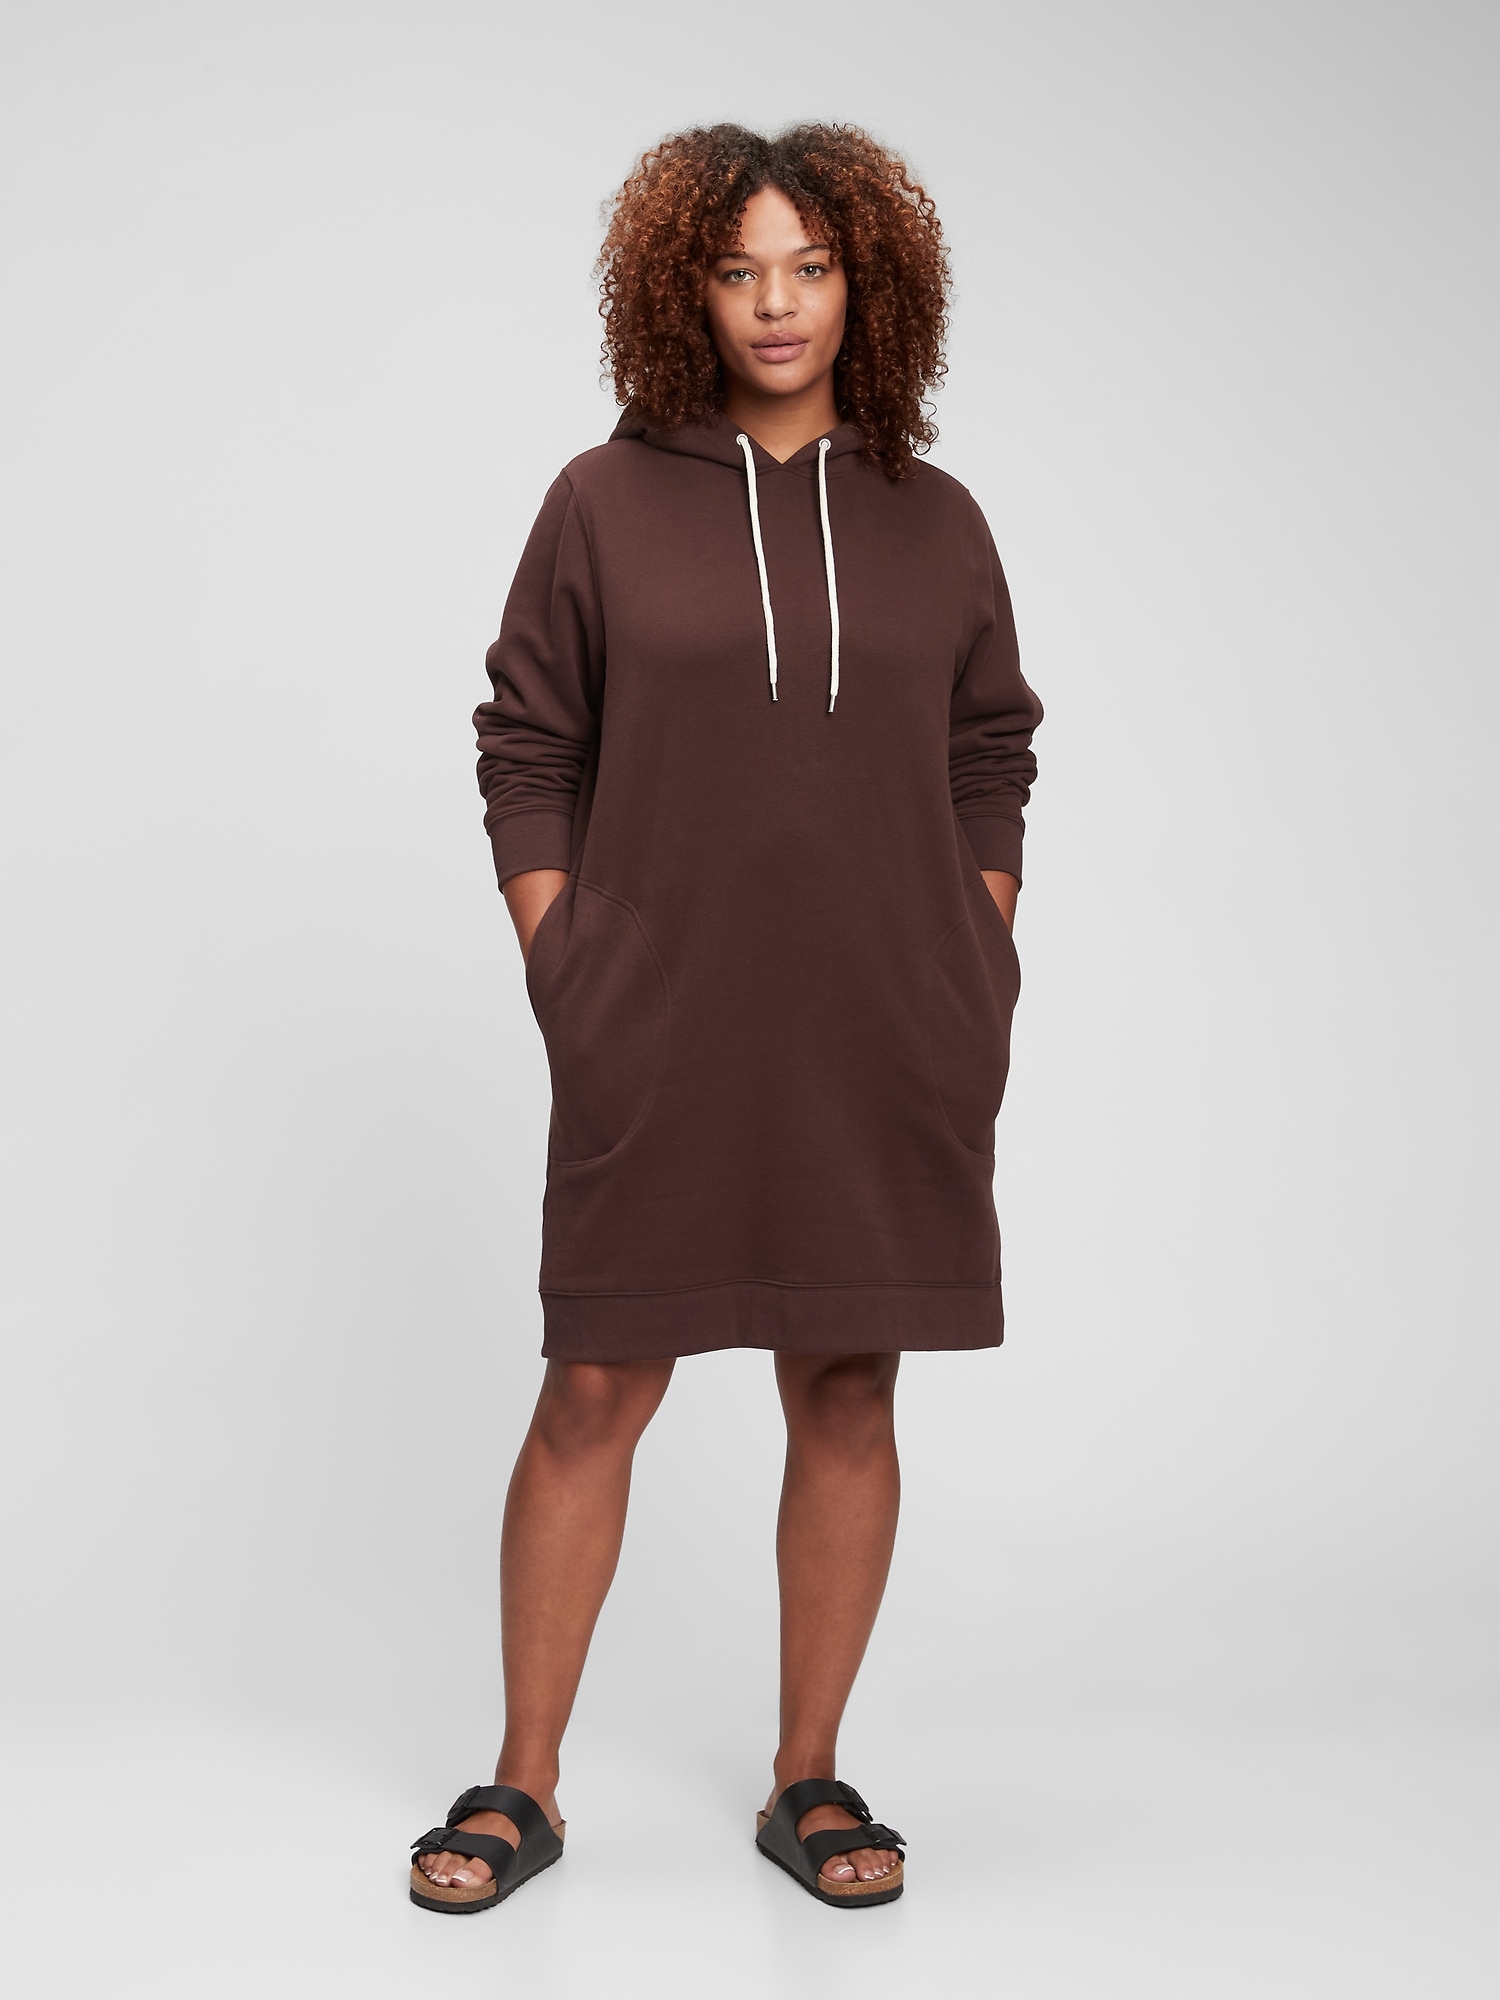  Women's Sexy Stretch Bodycon Hoodie Dress Fashion Cute Pullover Hoody  Dress Party Casual Fitted Oversized Sweatshirt : Clothing, Shoes & Jewelry